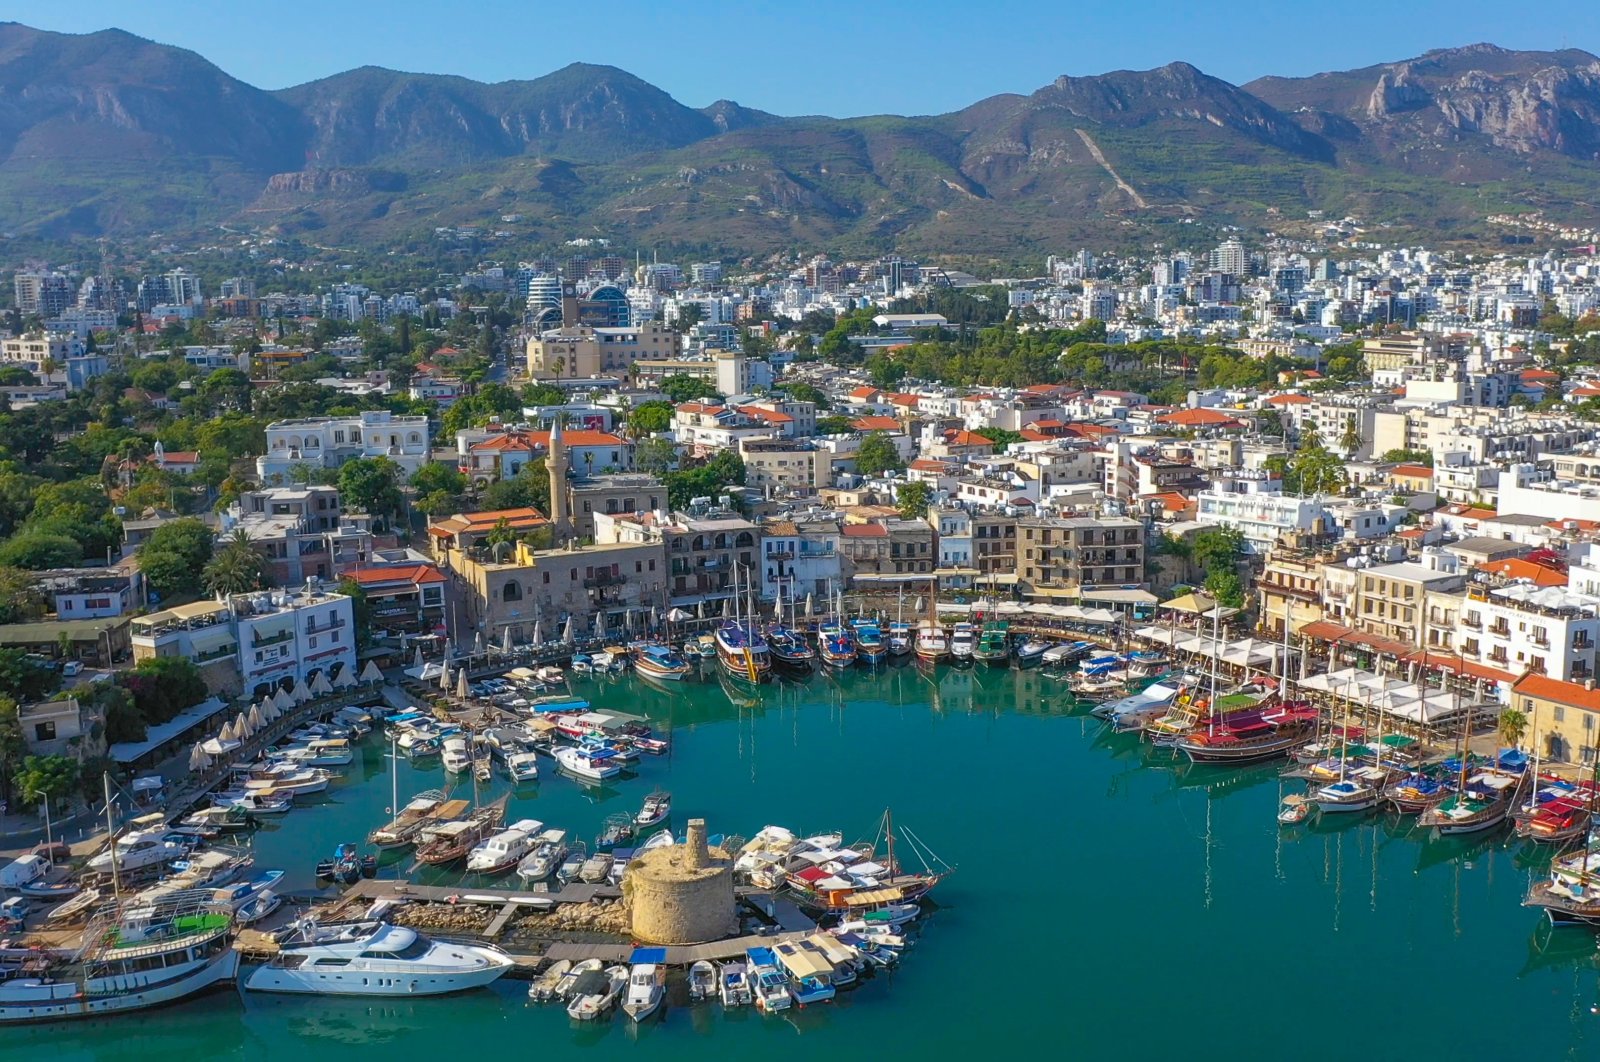 A view of Kyrenia (Girne) in Turkish Republic of Northern Cyprus where Falyalı resided and owned a popular hotel. (Shutterstock Photo) 